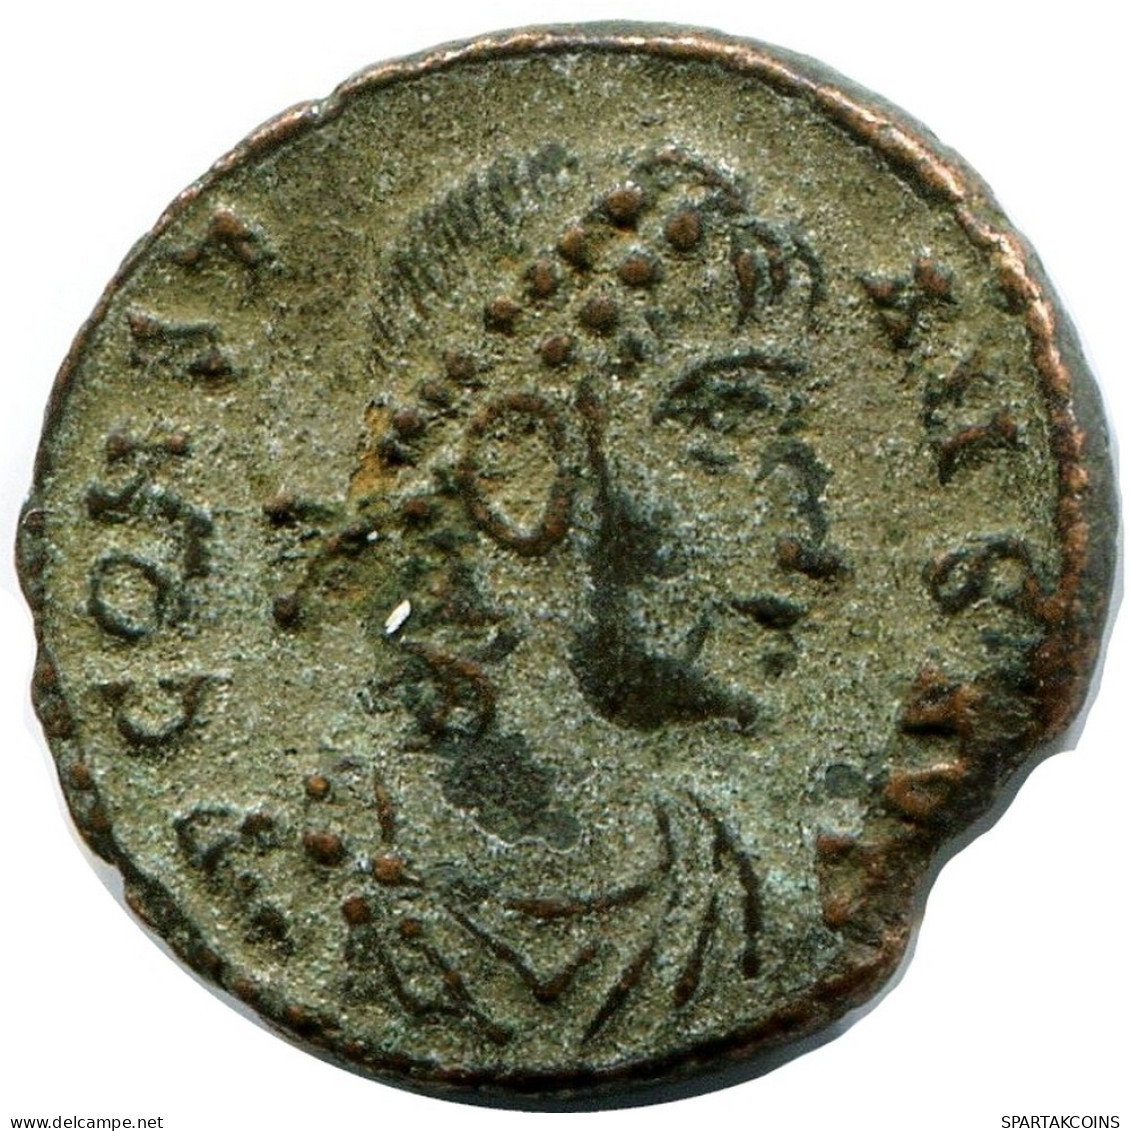 CONSTANS MINTED IN ALEKSANDRIA FOUND IN IHNASYAH HOARD EGYPT #ANC11470.14.D.A - The Christian Empire (307 AD Tot 363 AD)